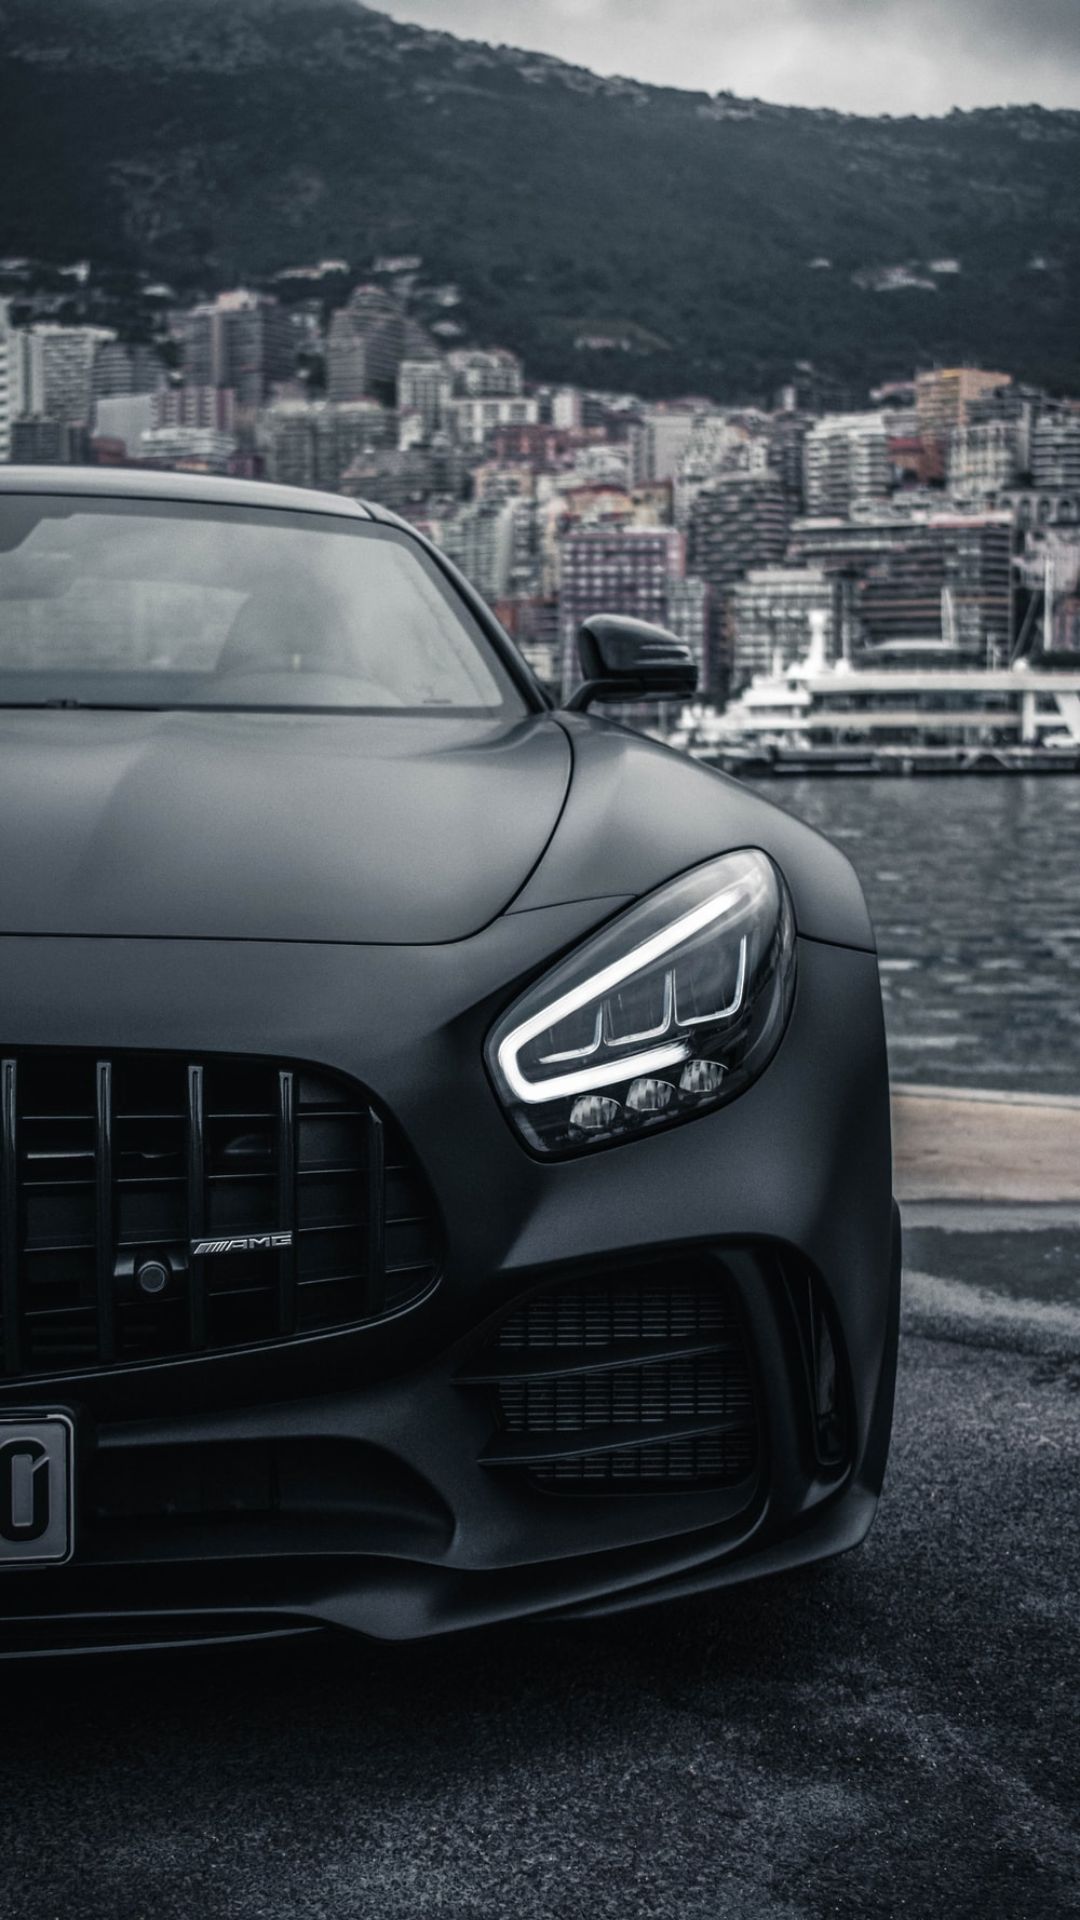 Download wallpaper 1350x2400 mercedes car black front view iphone  876s6 for parallax hd background